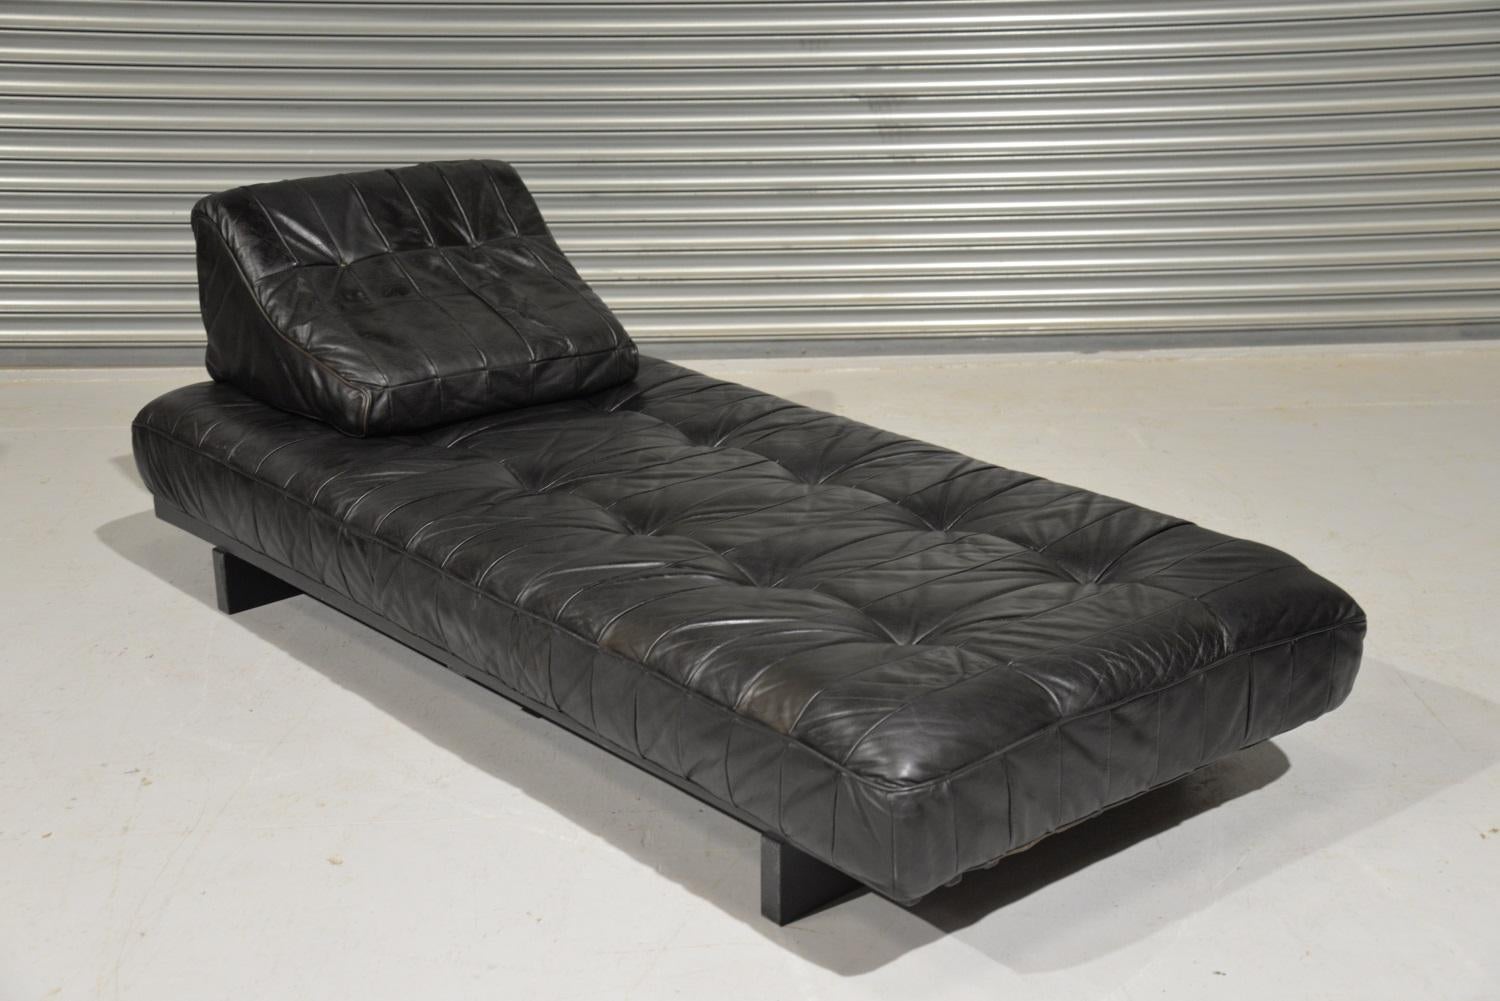 We are delighted to bring to you an extremely rare and highly desirable original vintage daybed. Hand built in the 1960s by De Sede craftsman in Switzerland and upholstered in stunning soft patchwork aniline leather. The daybed is extremely